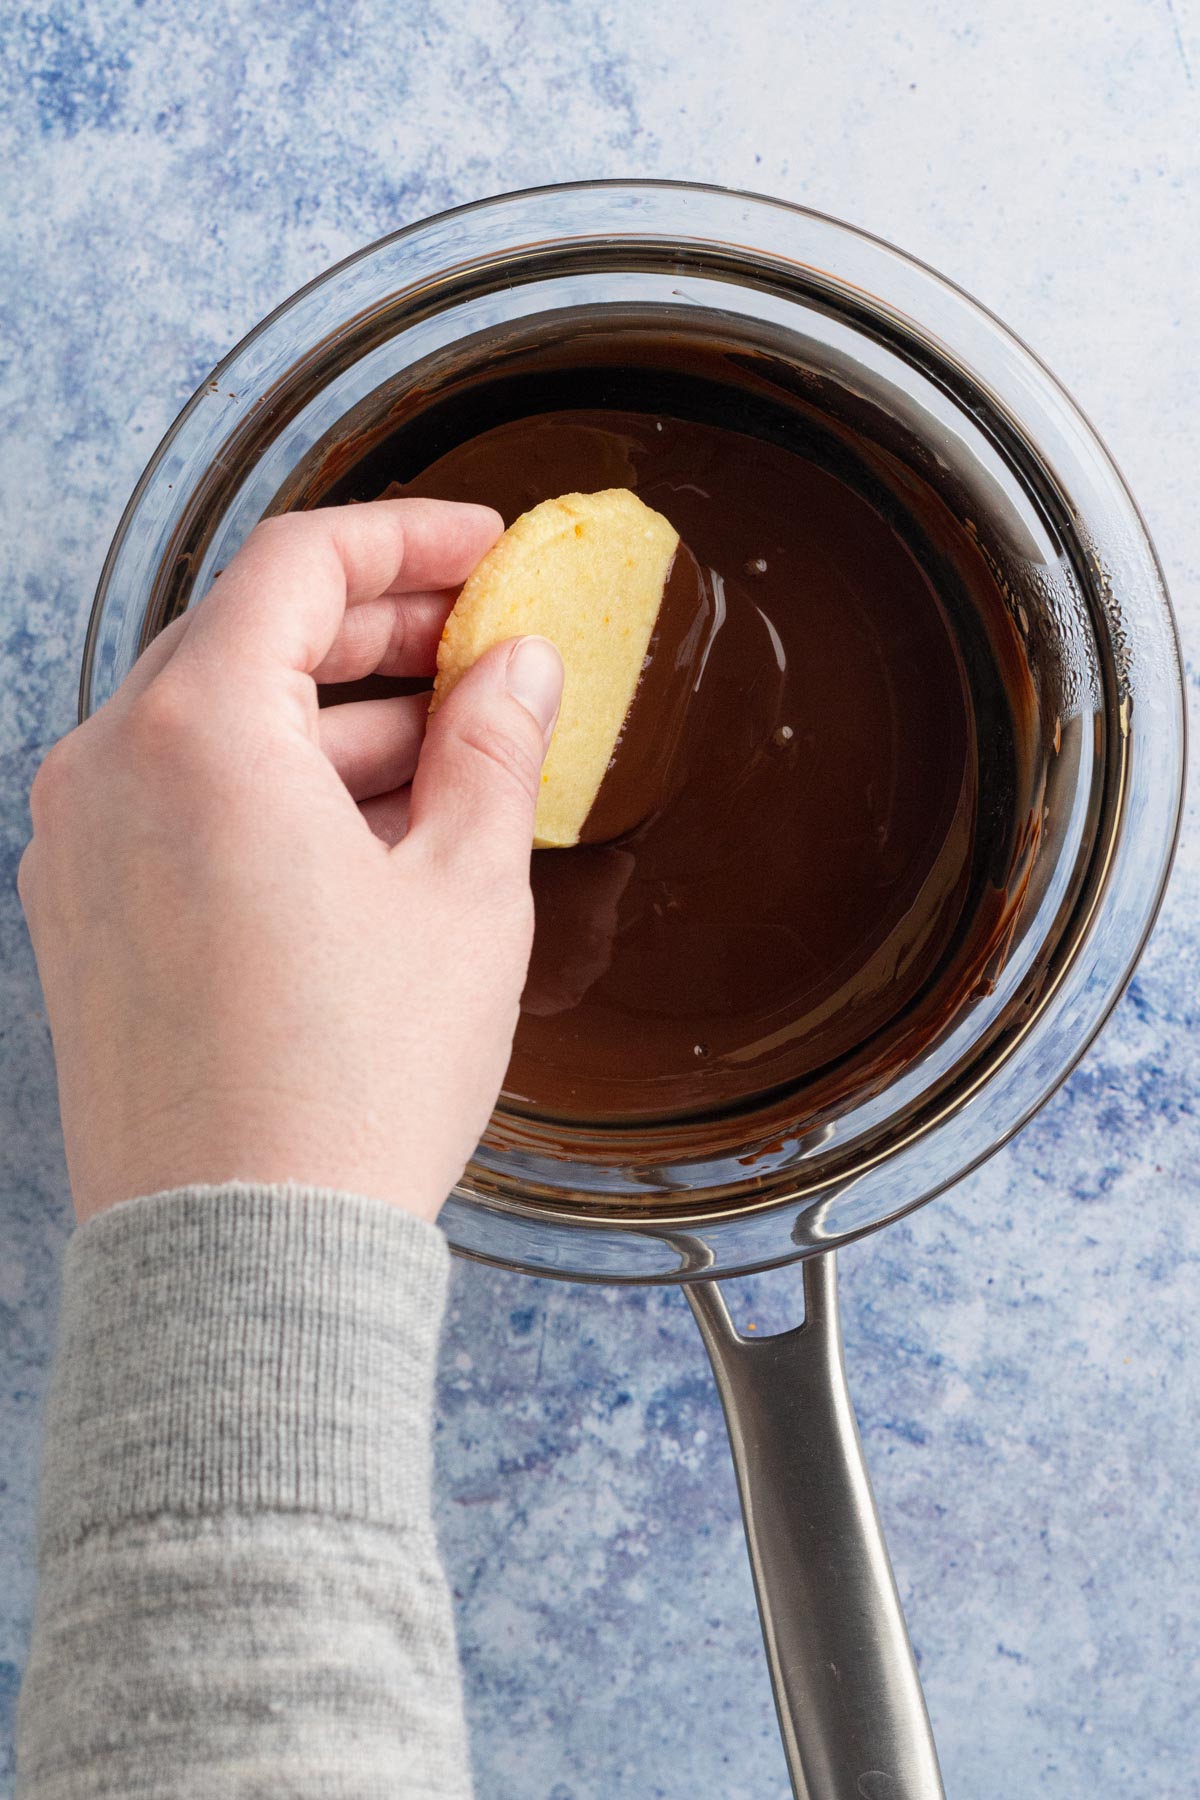 Hand dipping a shortbread cookie into melted chocolate in a double boiler.